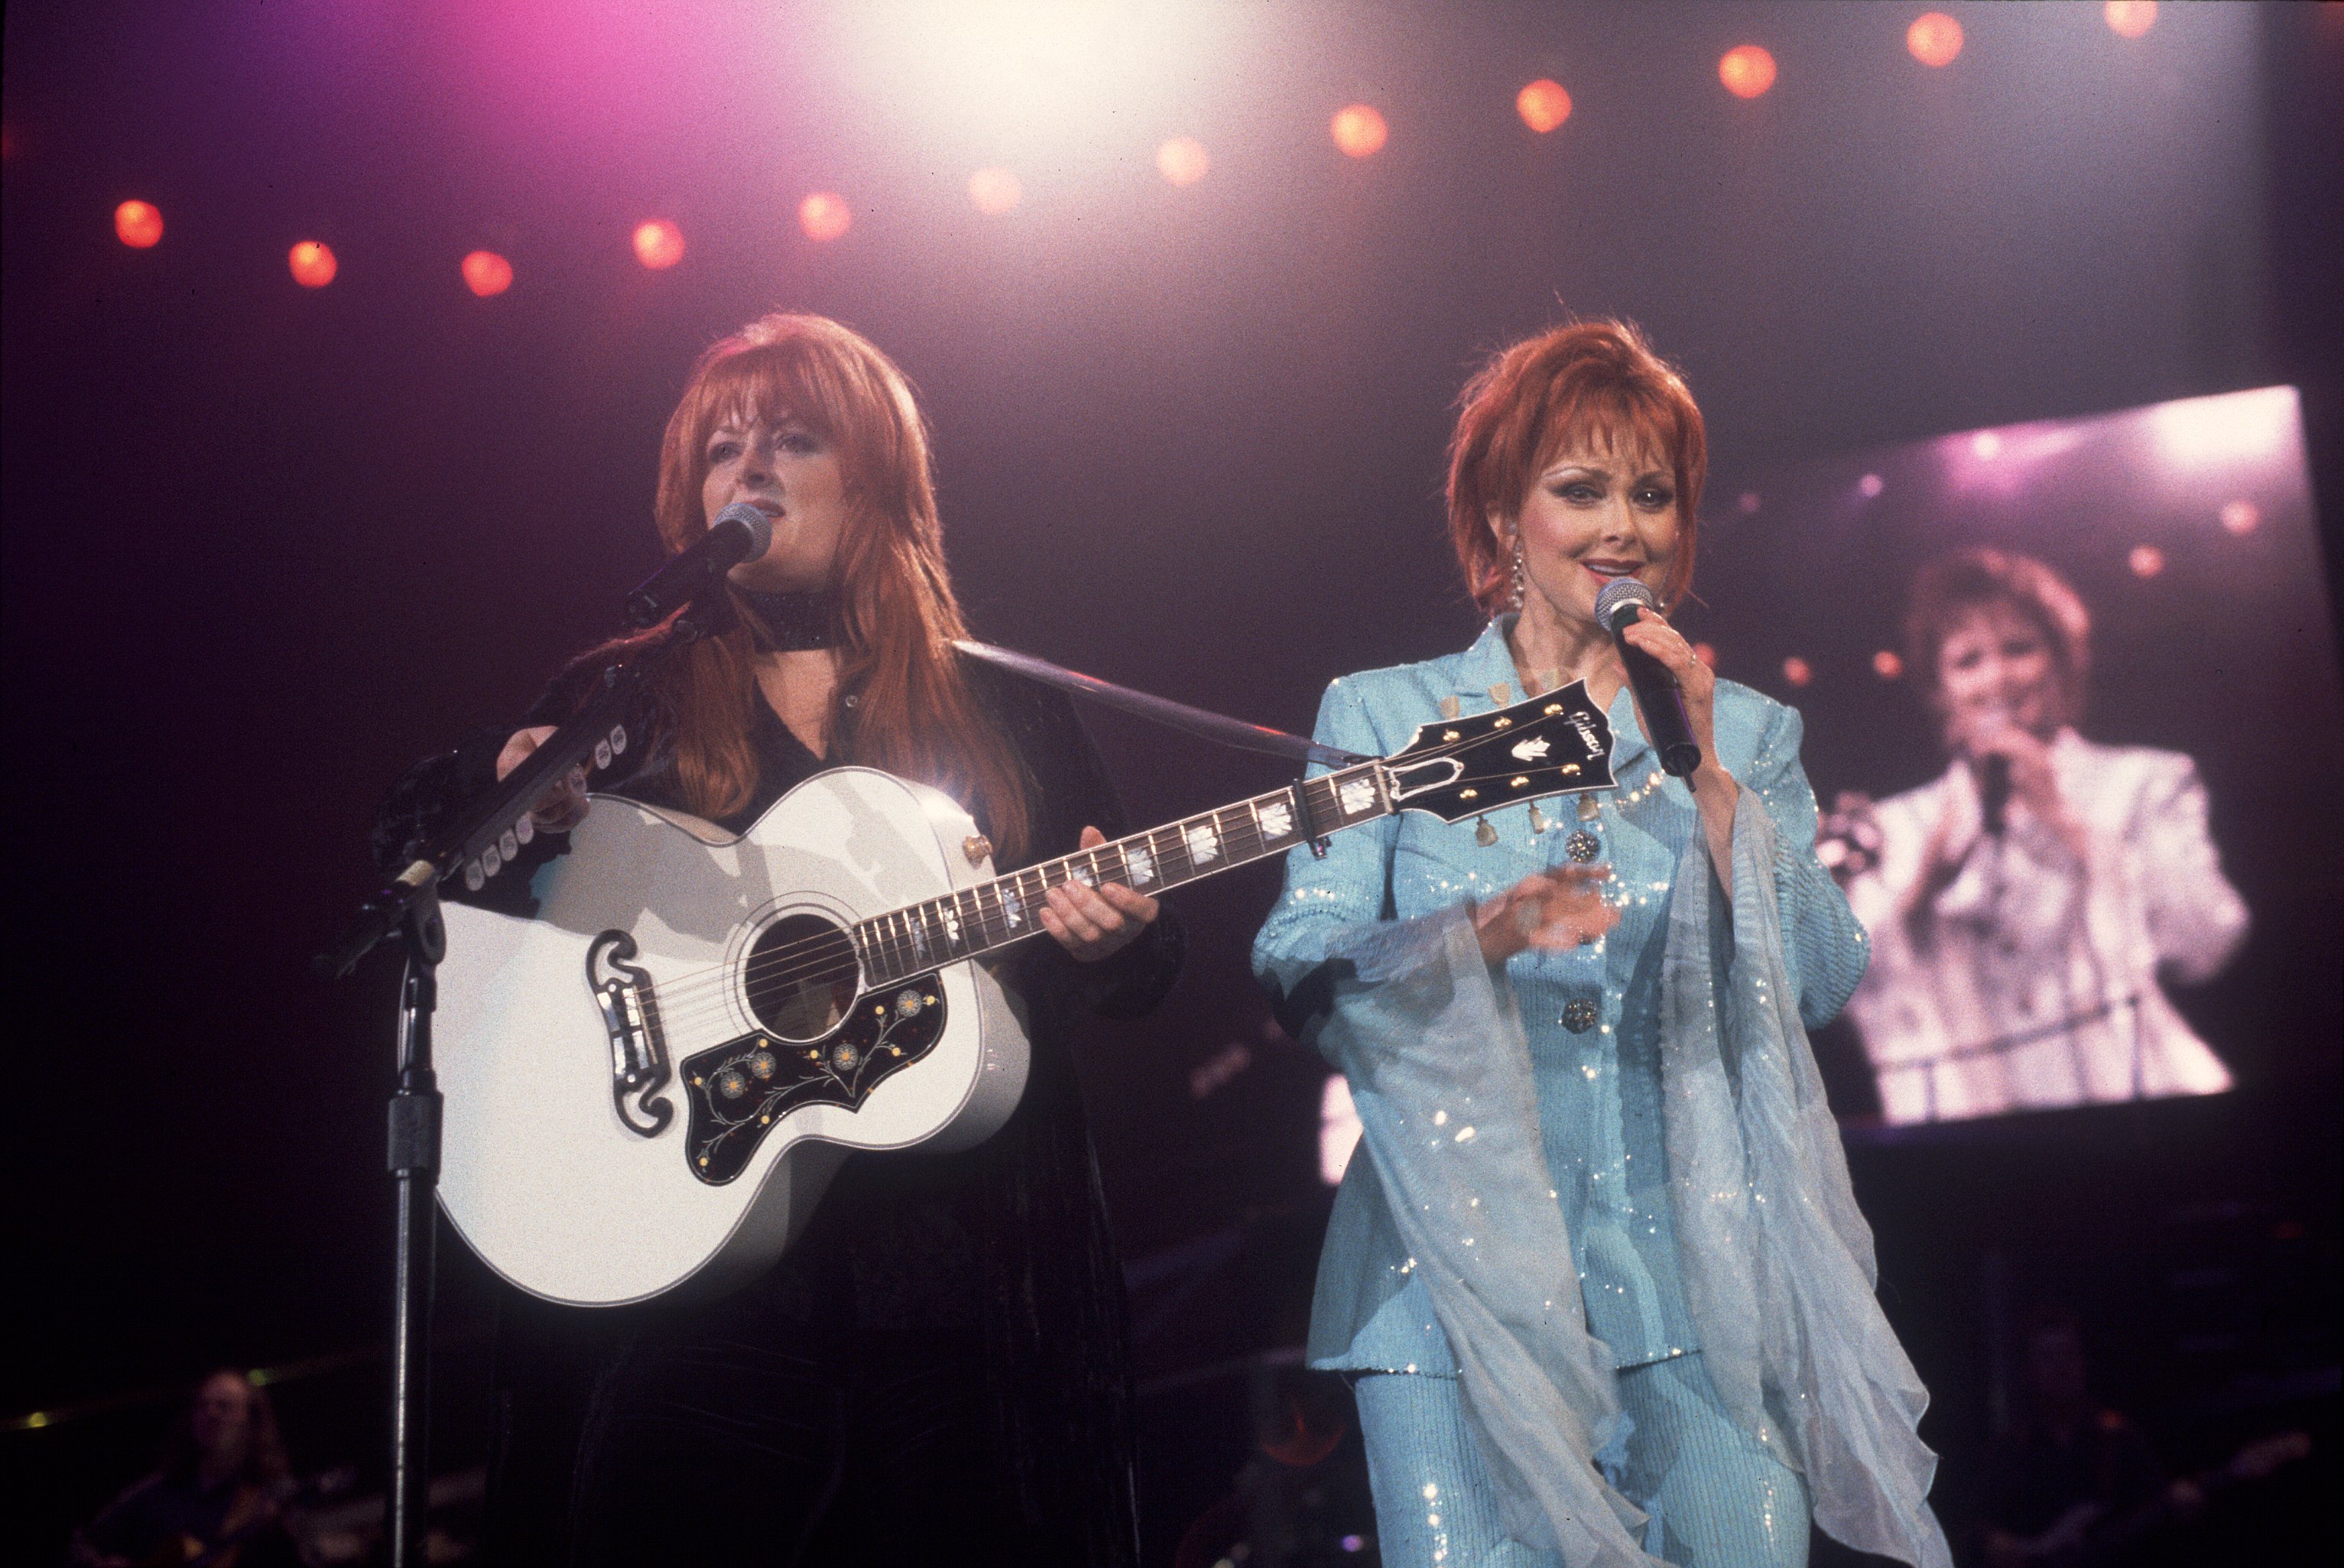 Country music duo the Judds, with Wynonna Judd and her mother Naomi, perform onstage at the Rosemont Horizon in Rosemont, Illinois, on February 1, 1991. | Source: Getty Images